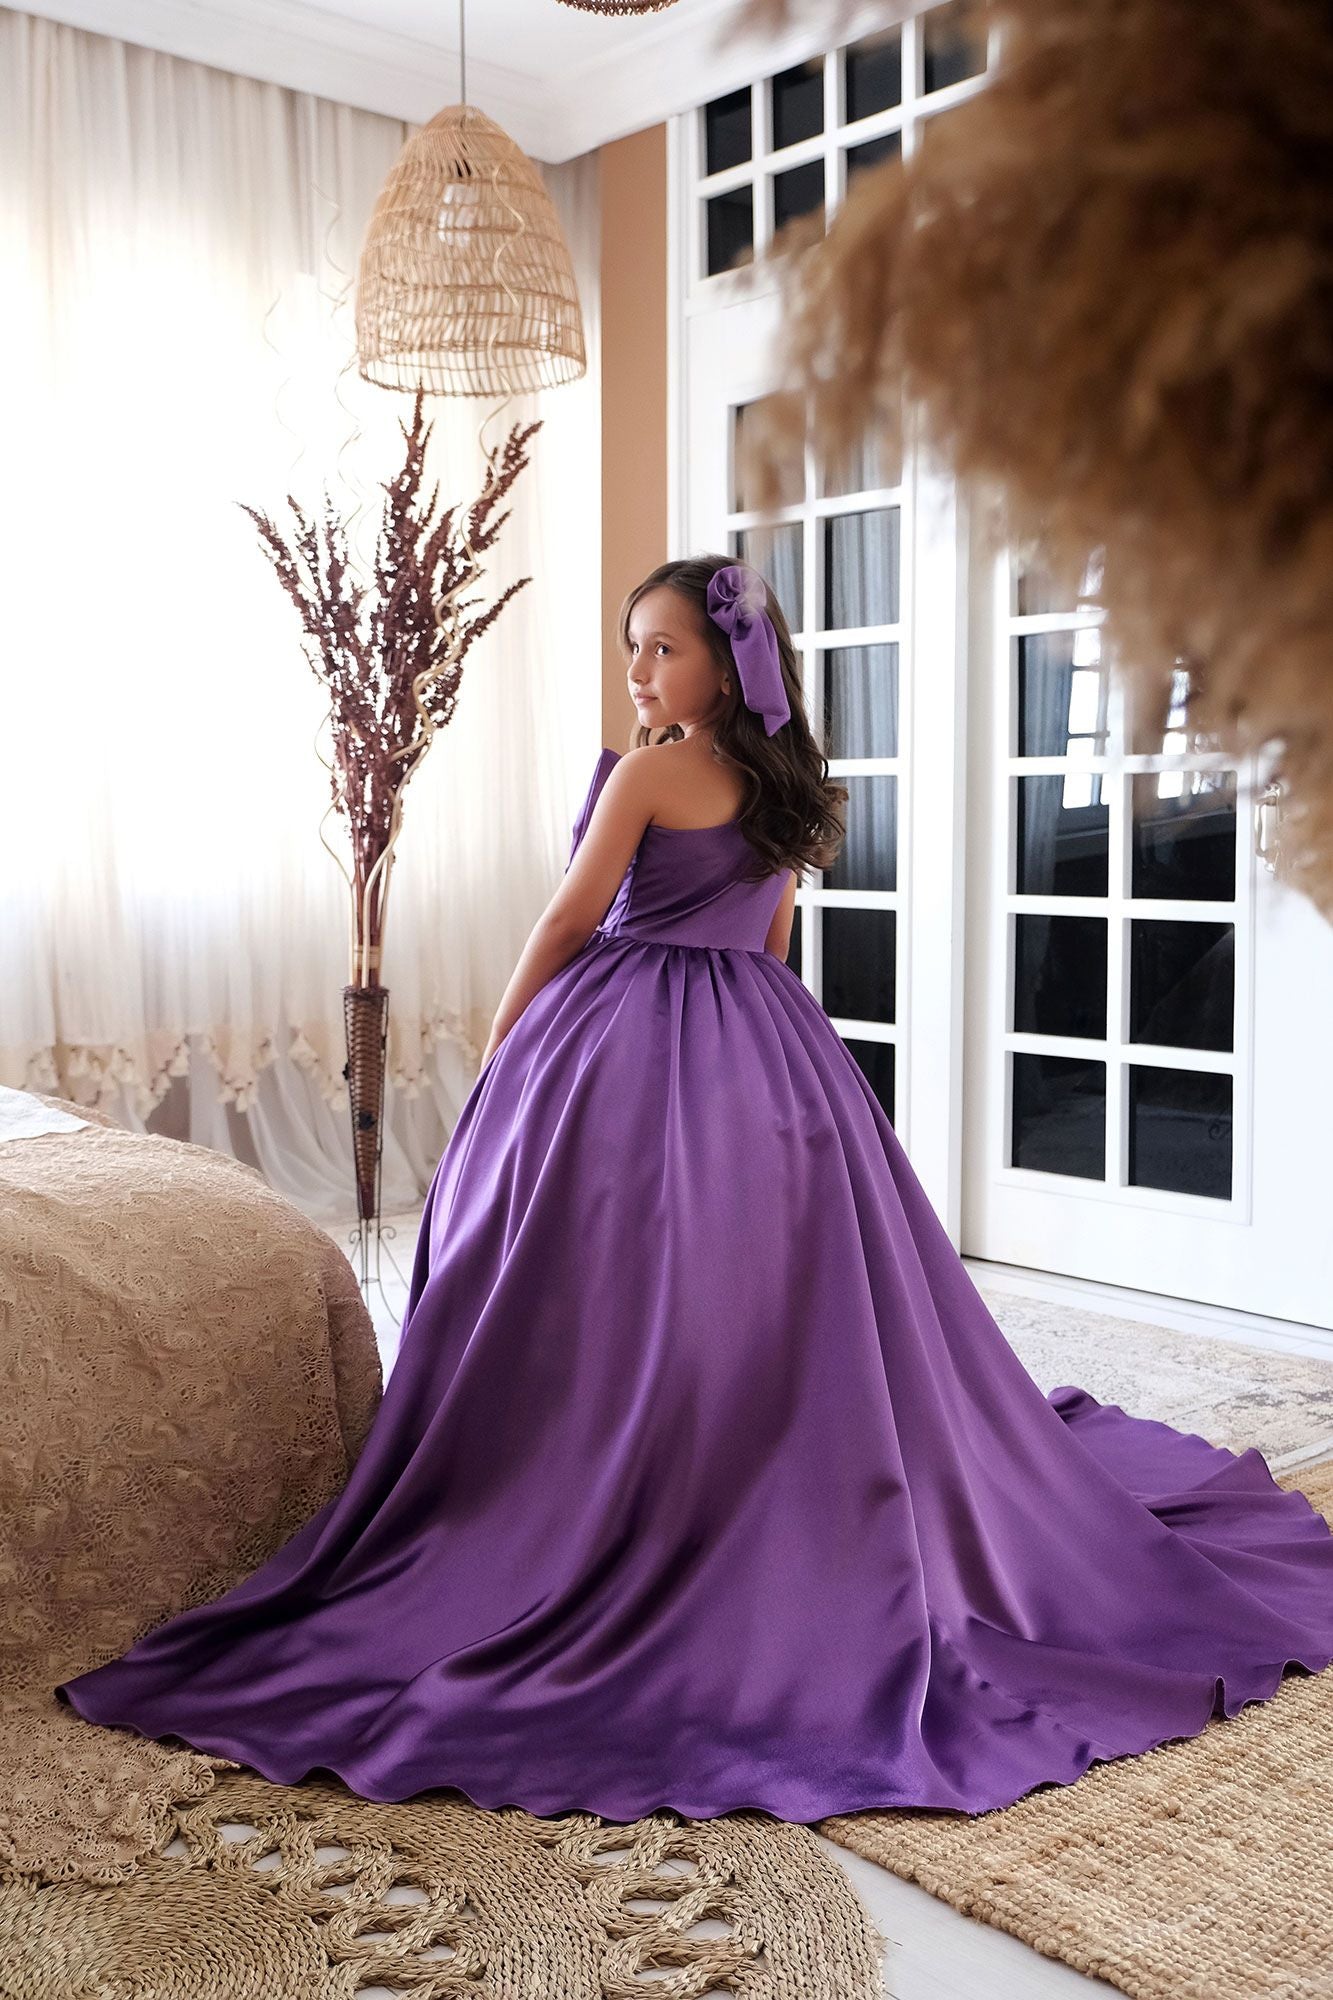 a woman in a purple dress sitting on a bed